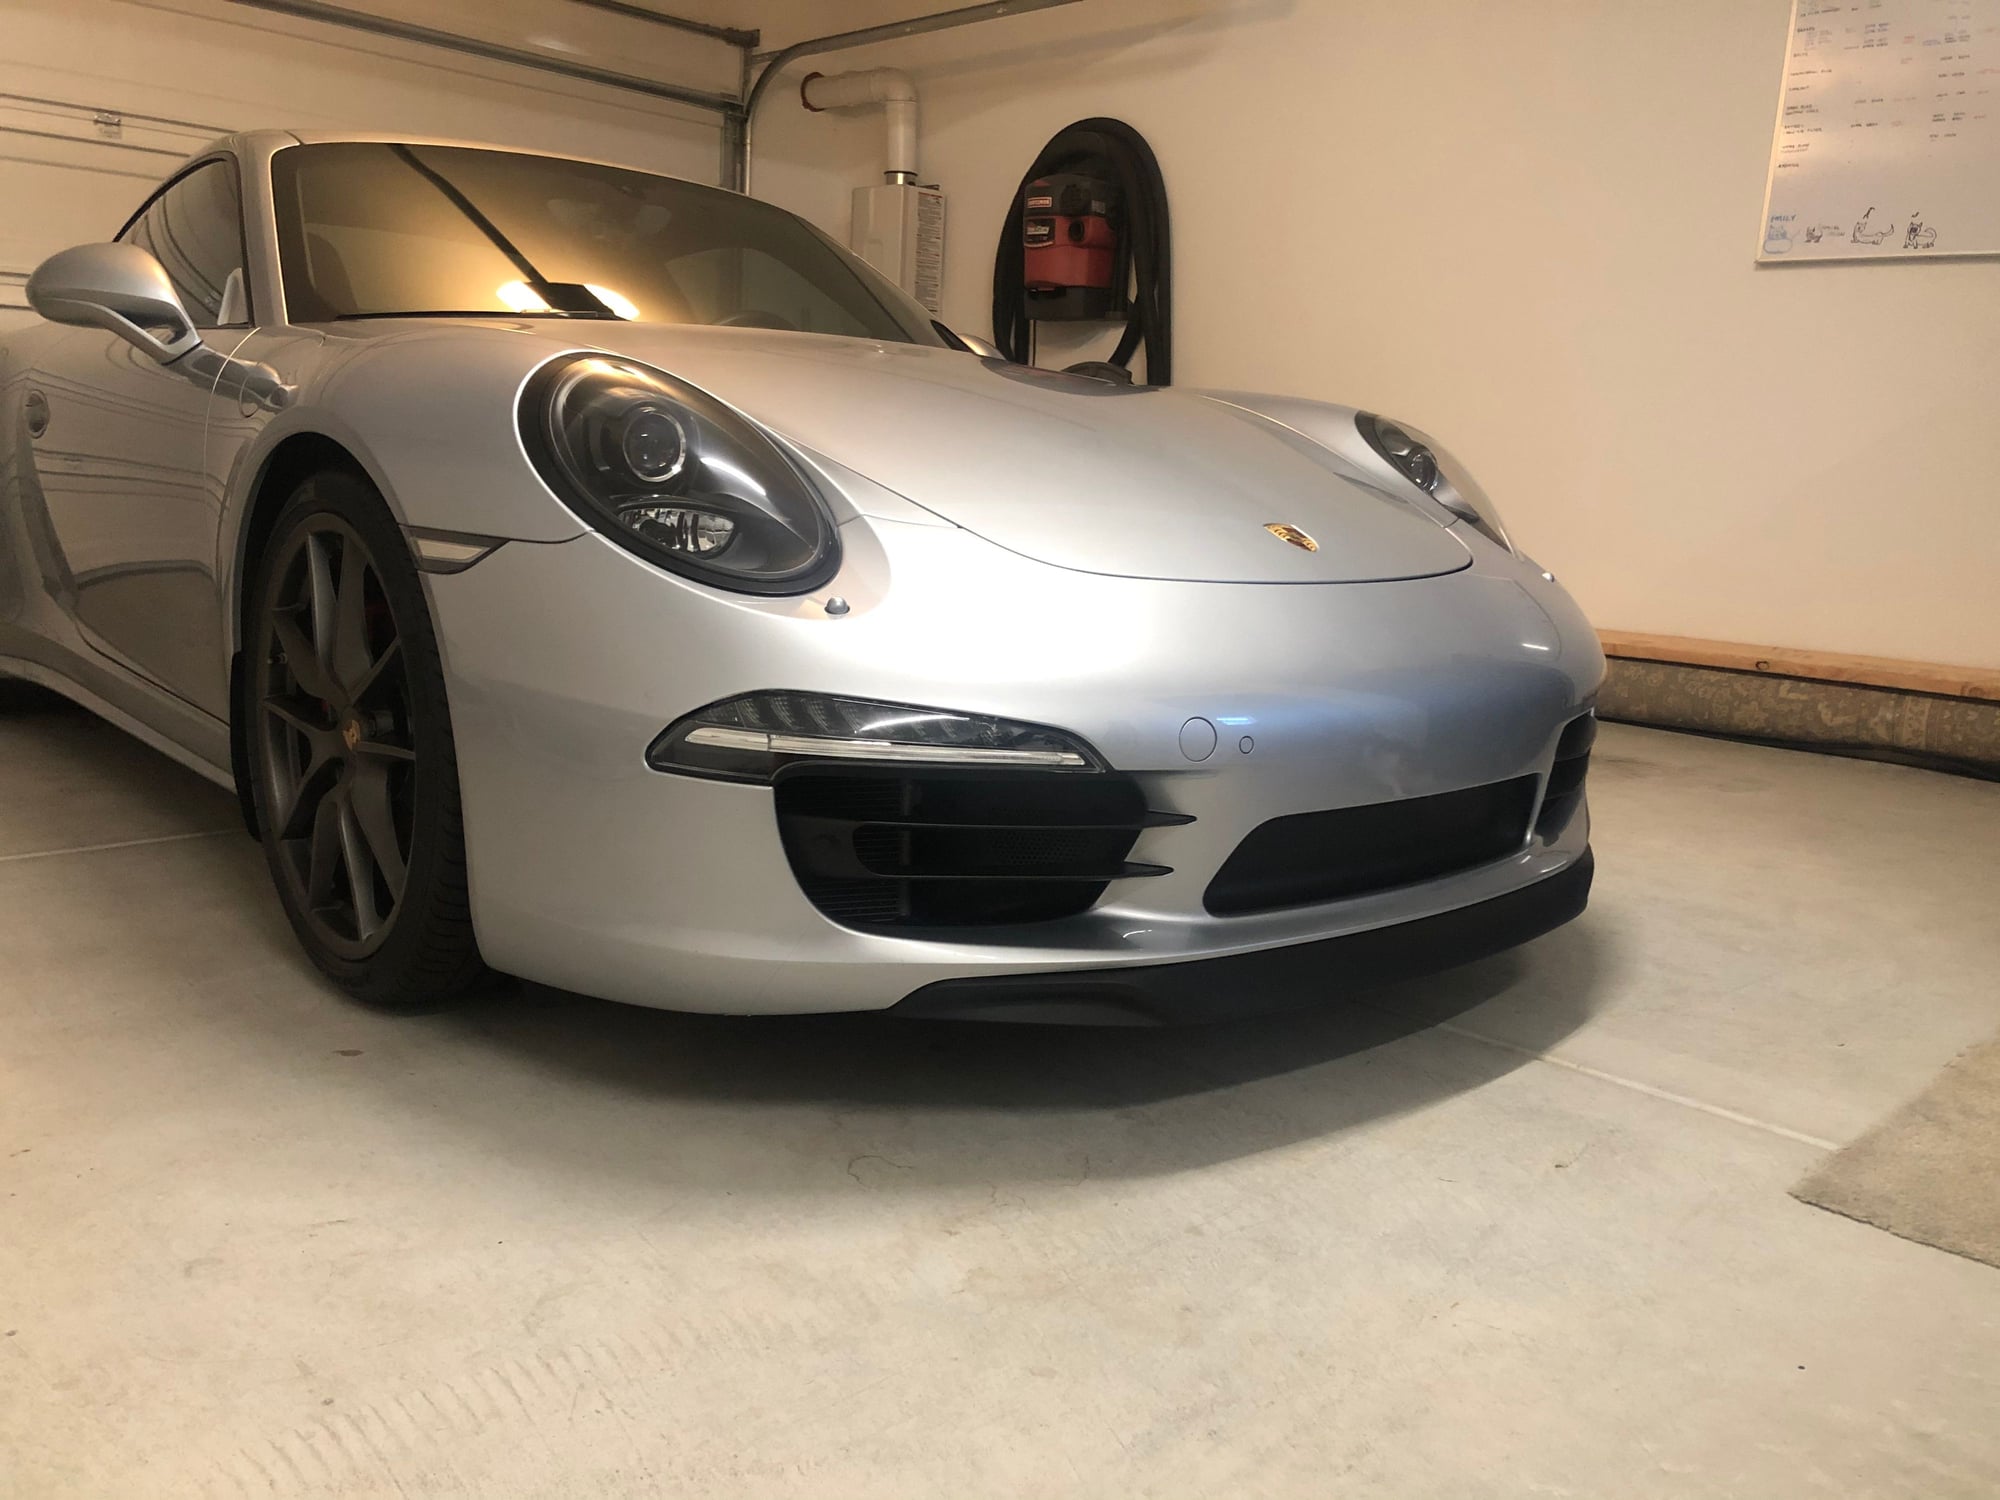 Exterior Body Parts - C4S Front bumper and spoiler - Used - 2012 to 2018 Porsche 911 - San Diego, CA 91913, United States